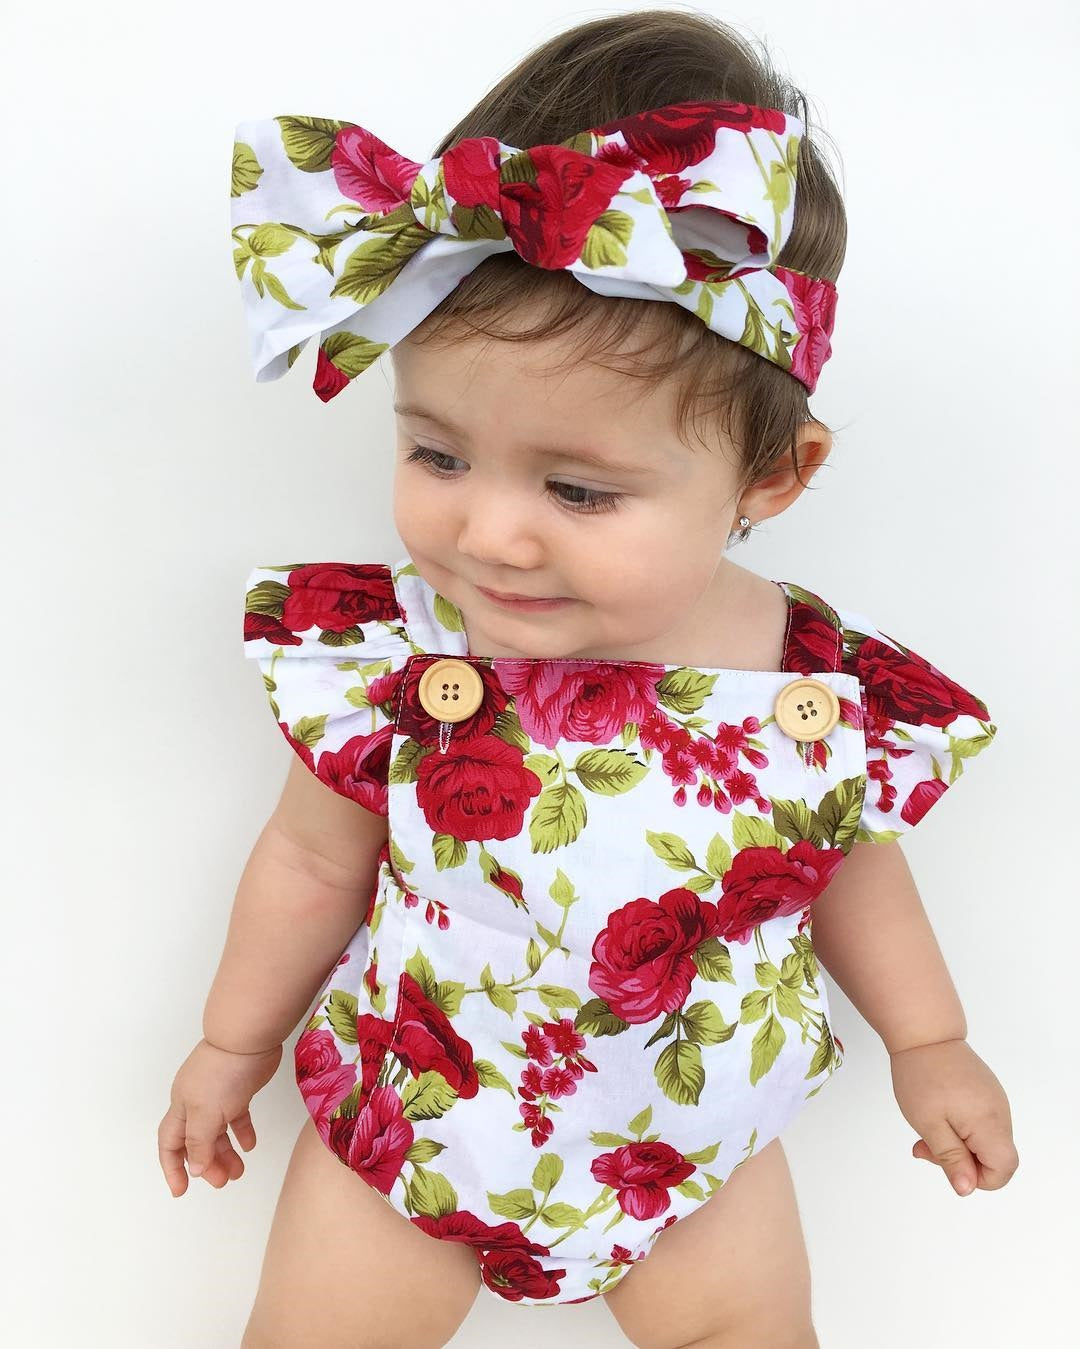 Happy floral baby girl outfit and hair bow headband